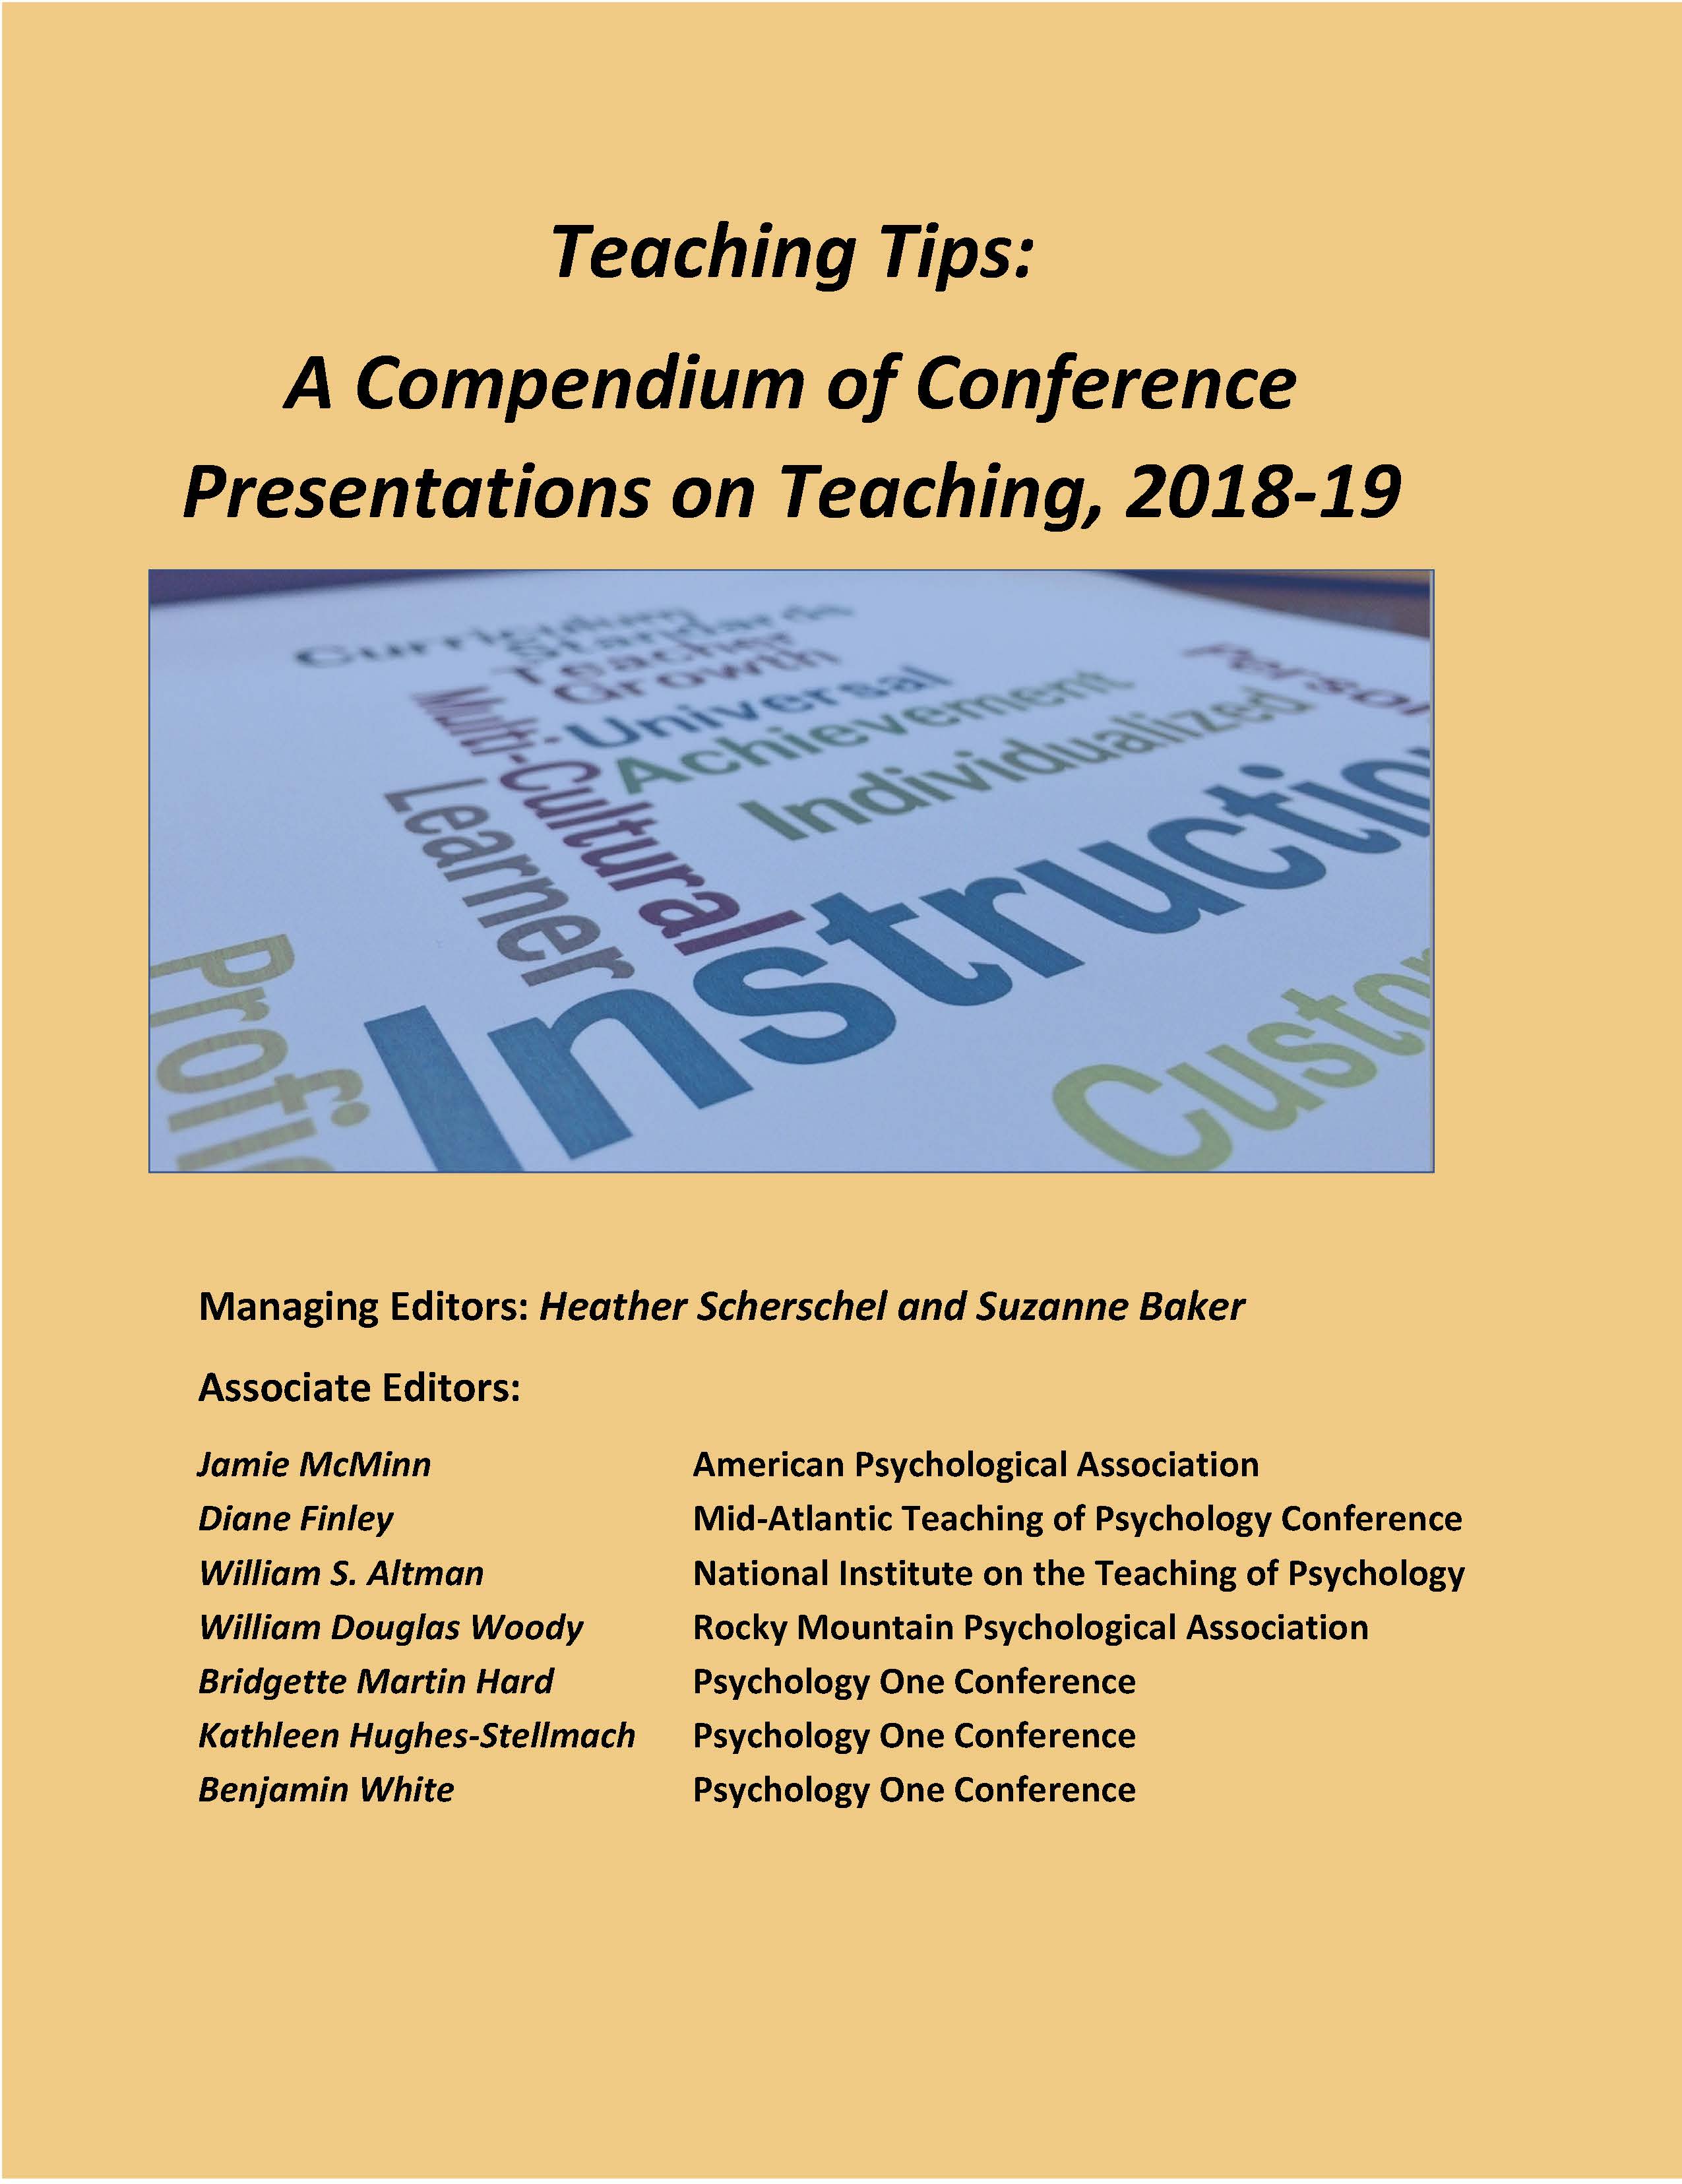 Teaching Tips: A Compendium of Conference Presentations on Teaching, 2018-2019